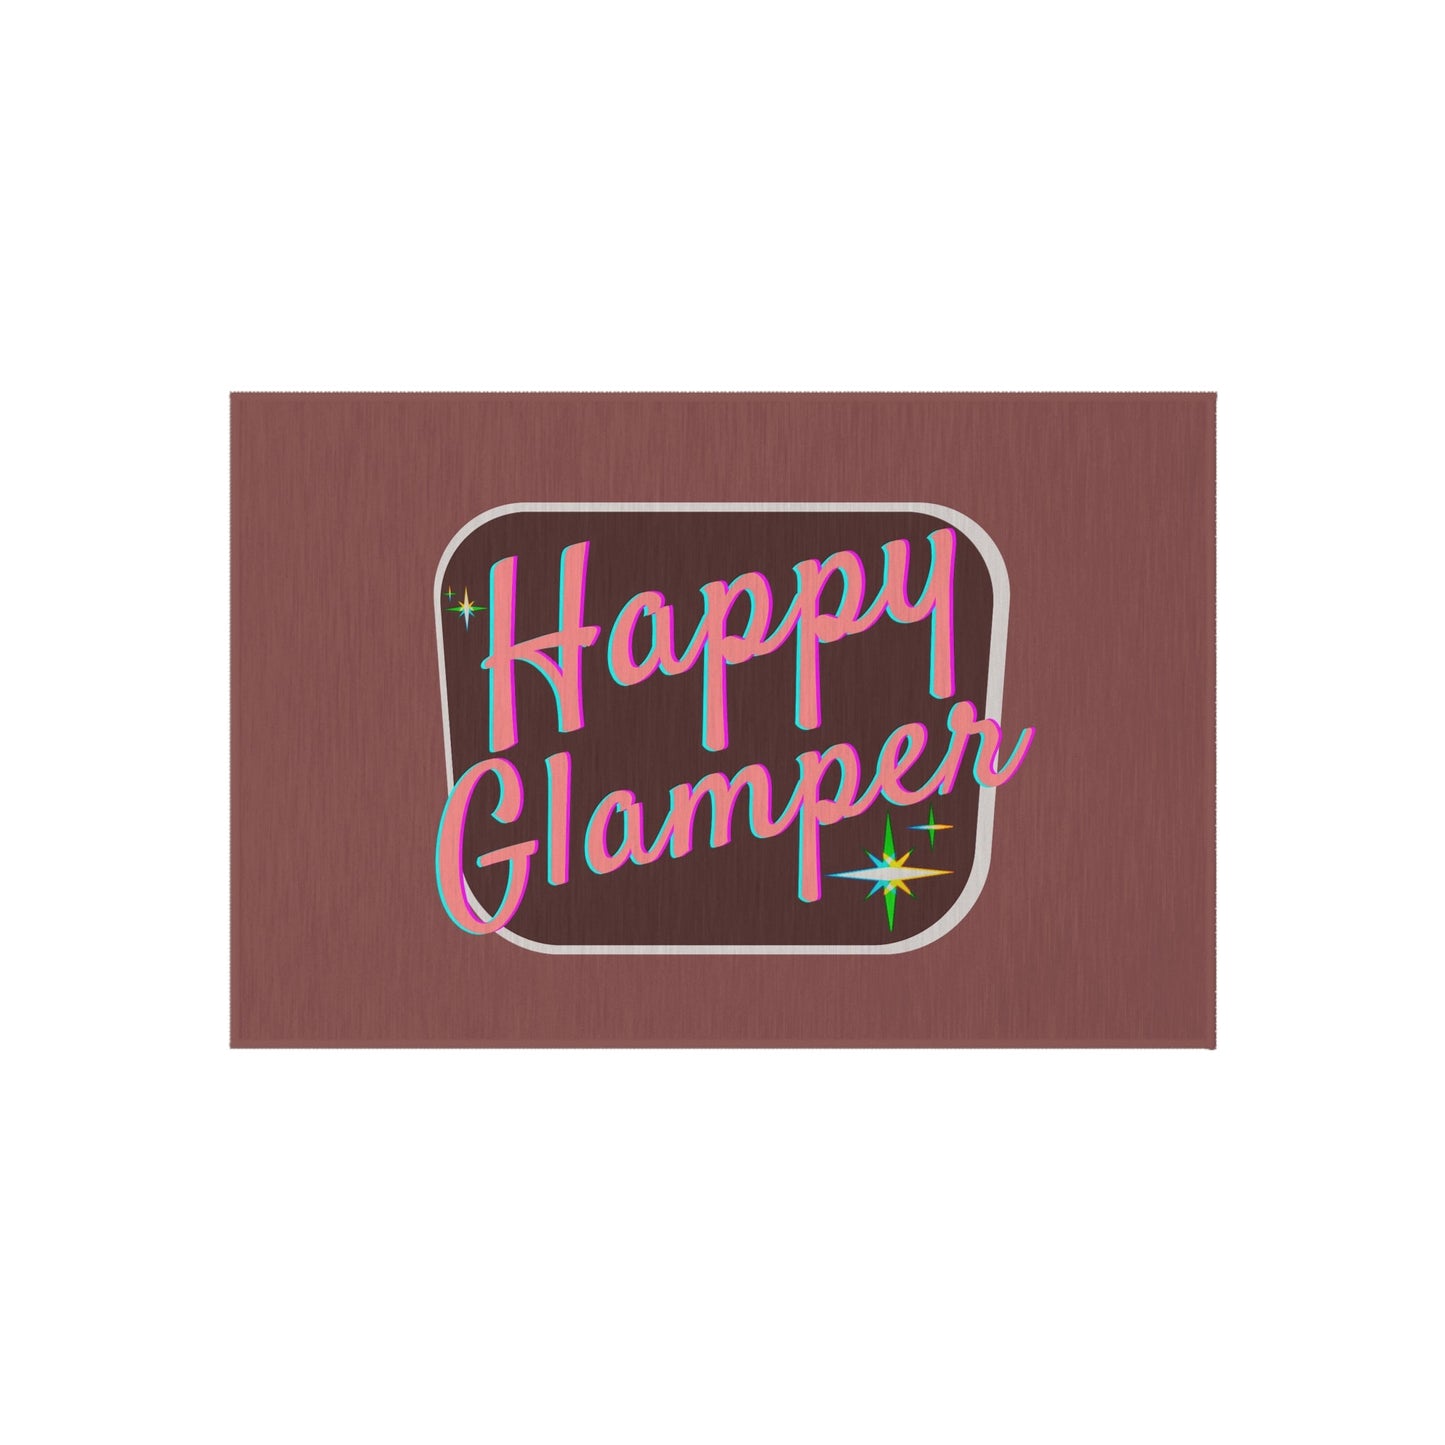 Green Happy Glamping Rug for Your Camper Van, Tent, or RV